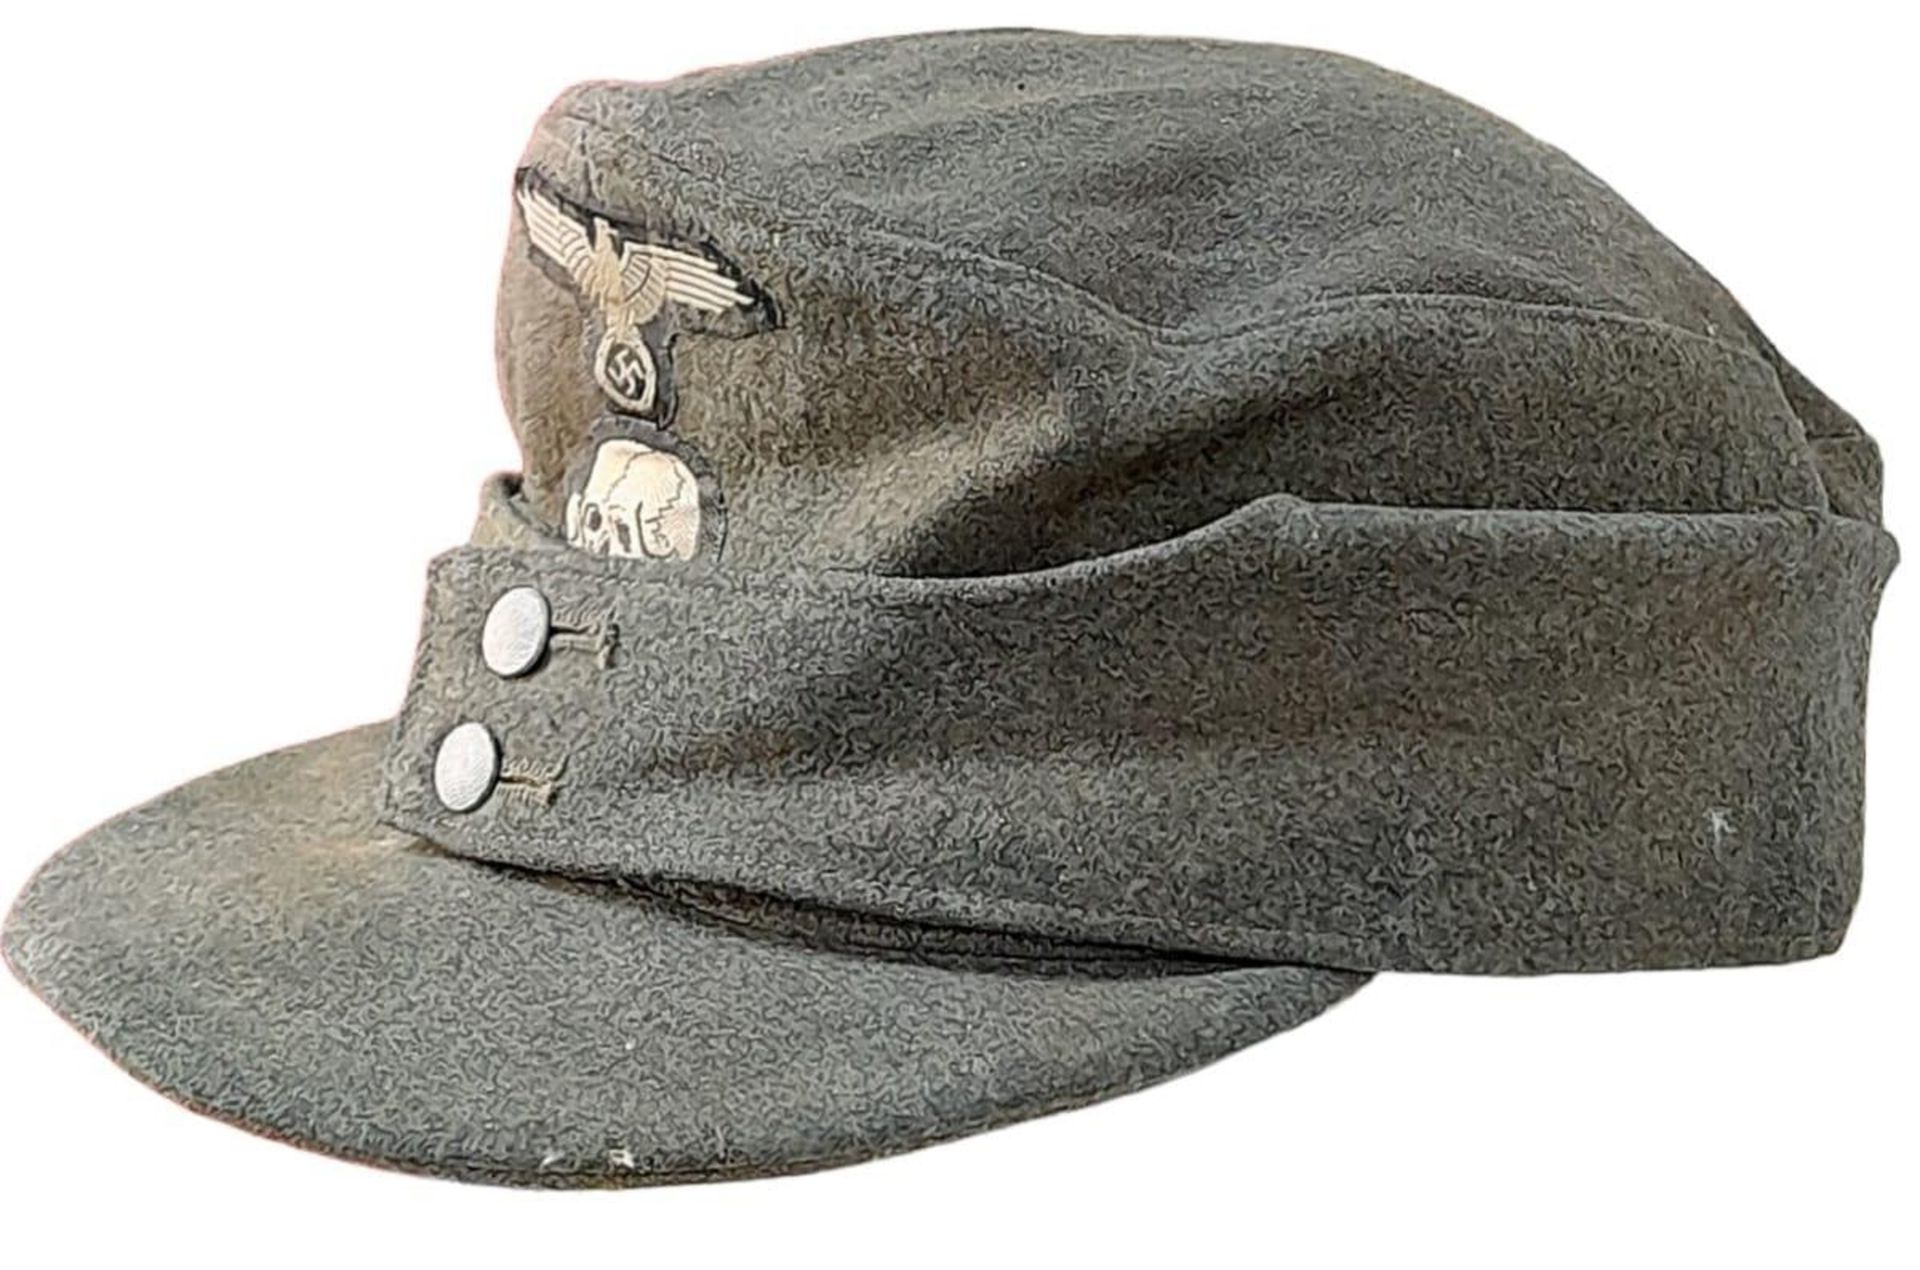 3rd Reich Waffen SS M43 Cap. very small cut on the top. A real “Been There” item. - Bild 2 aus 5